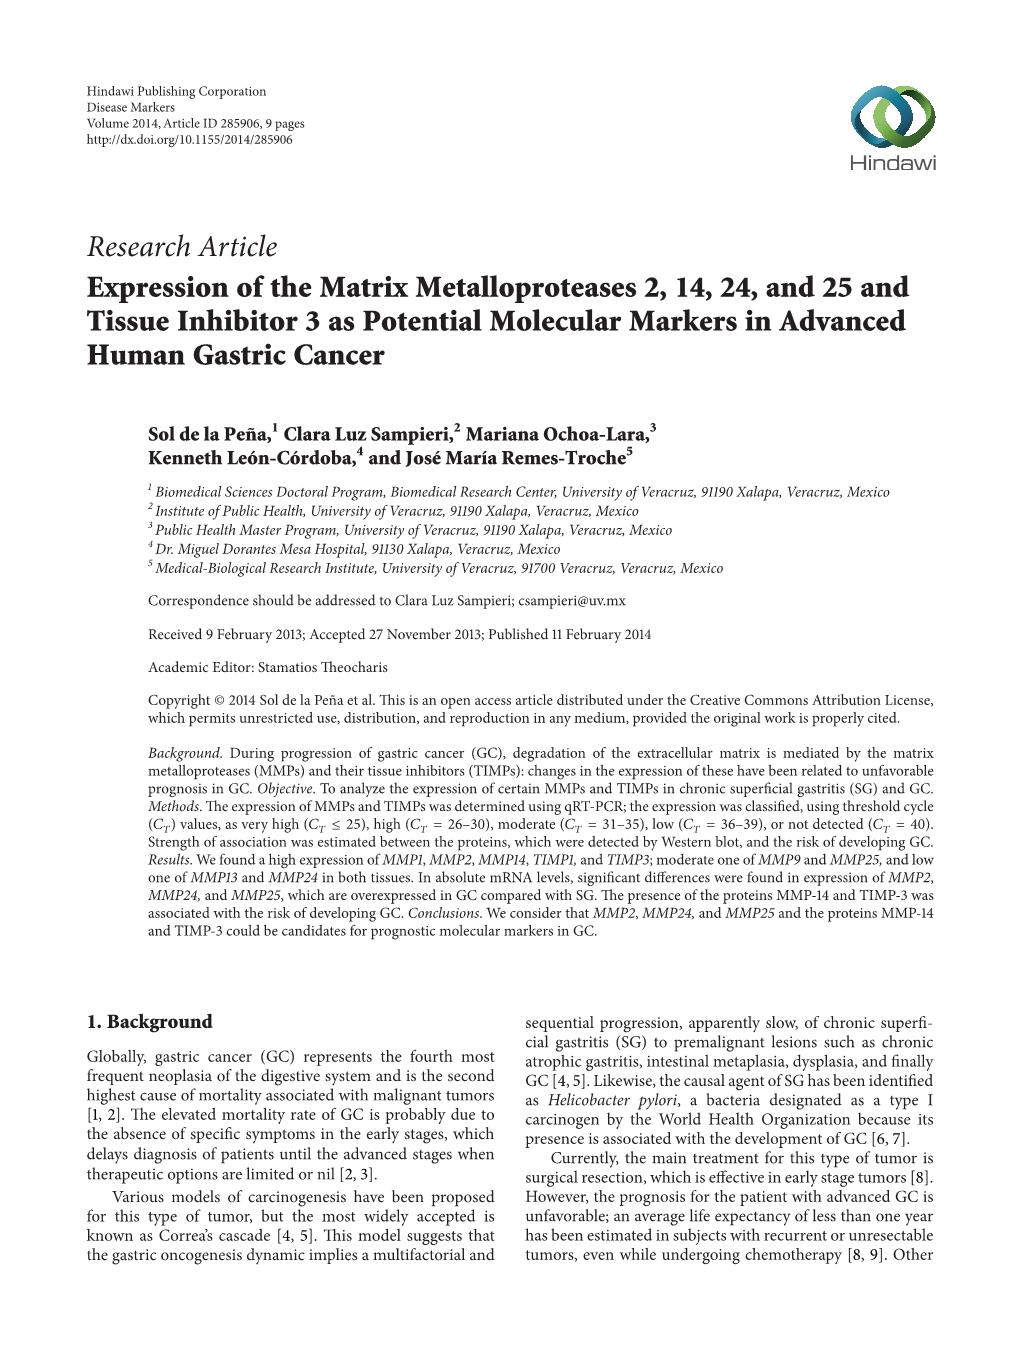 Expression of the Matrix Metalloproteases 2, 14, 24, and 25 and Tissue Inhibitor 3 As Potential Molecular Markers in Advanced Human Gastric Cancer